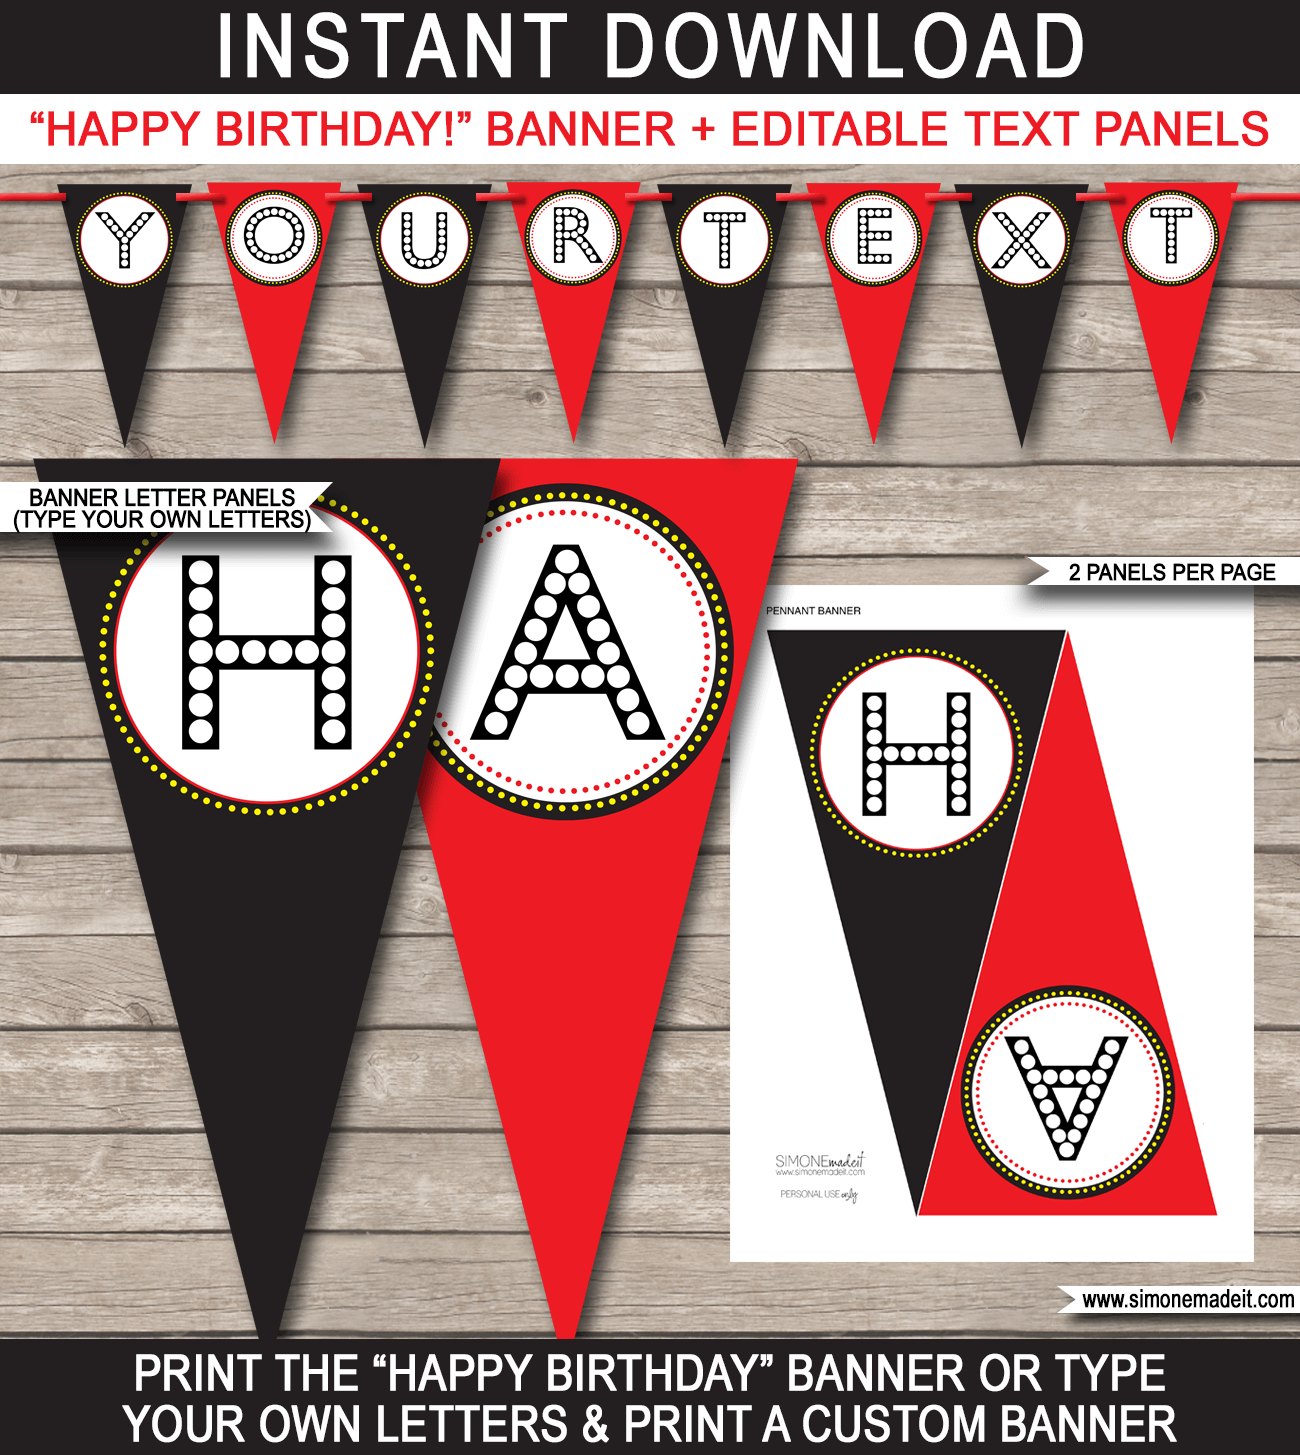 Movie Party Banner Template - Movie Bunting - Movie Night Bunting - Happy Birthday Banner - Birthday Party - Editable and Printable DIY Template - INSTANT DOWNLOAD $4.50 via simonemadeit.com